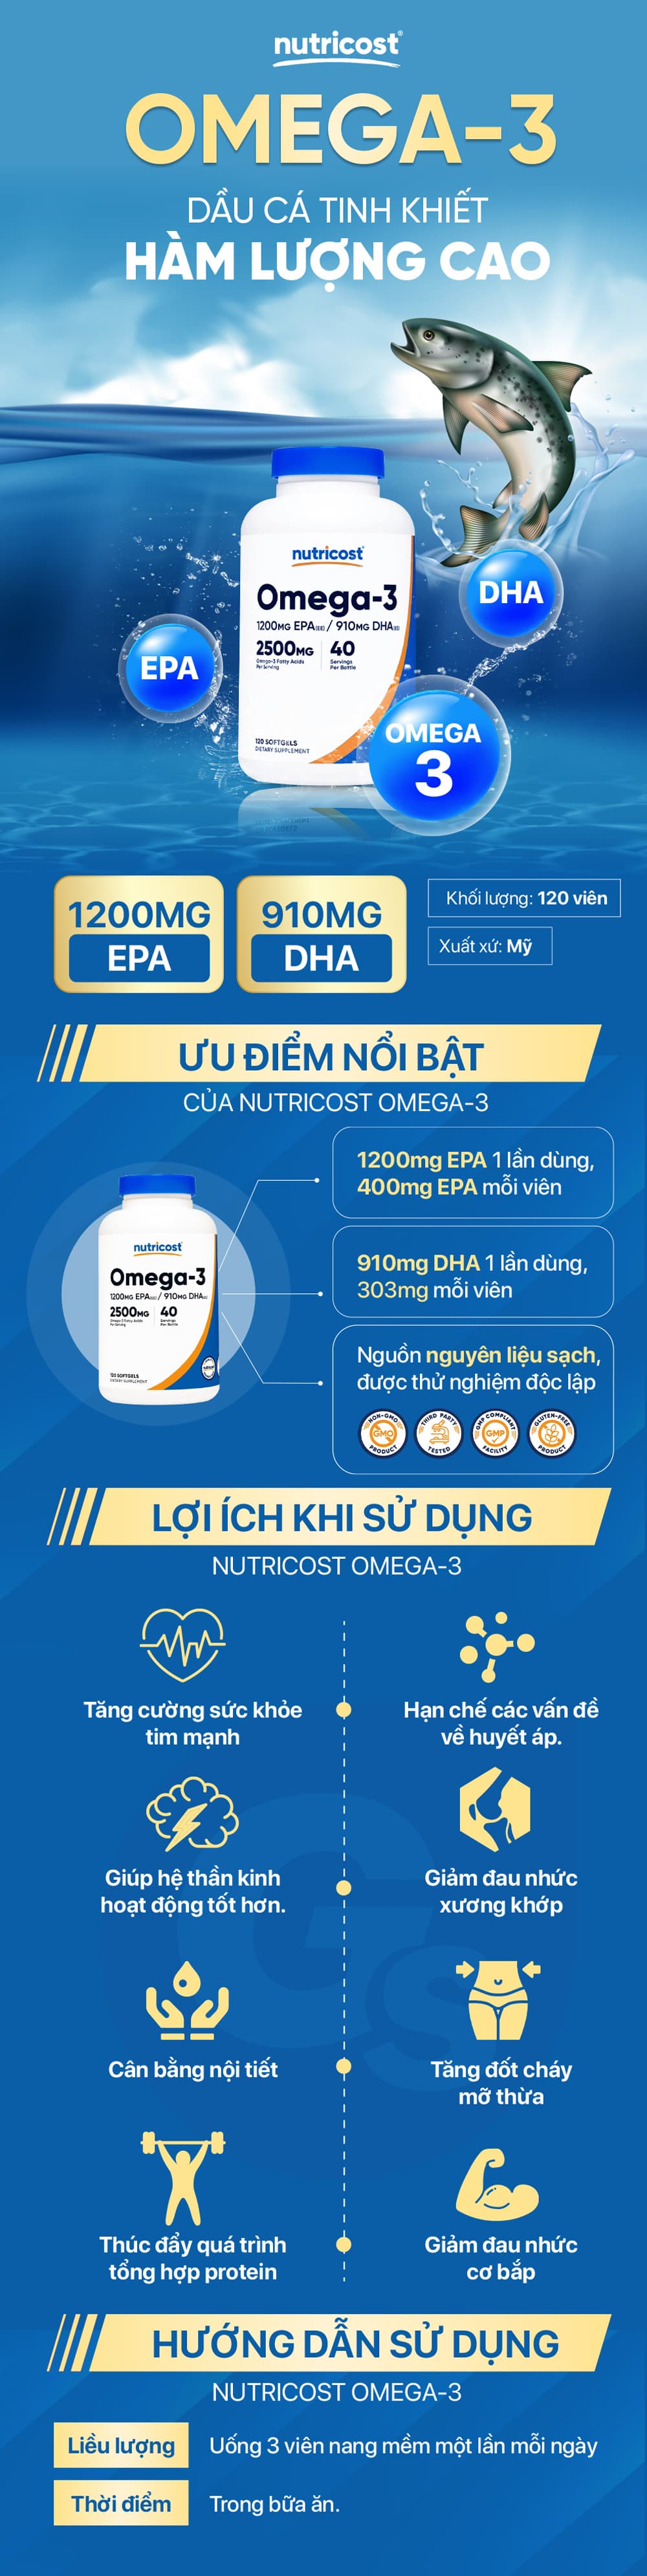 nutricost-omega3